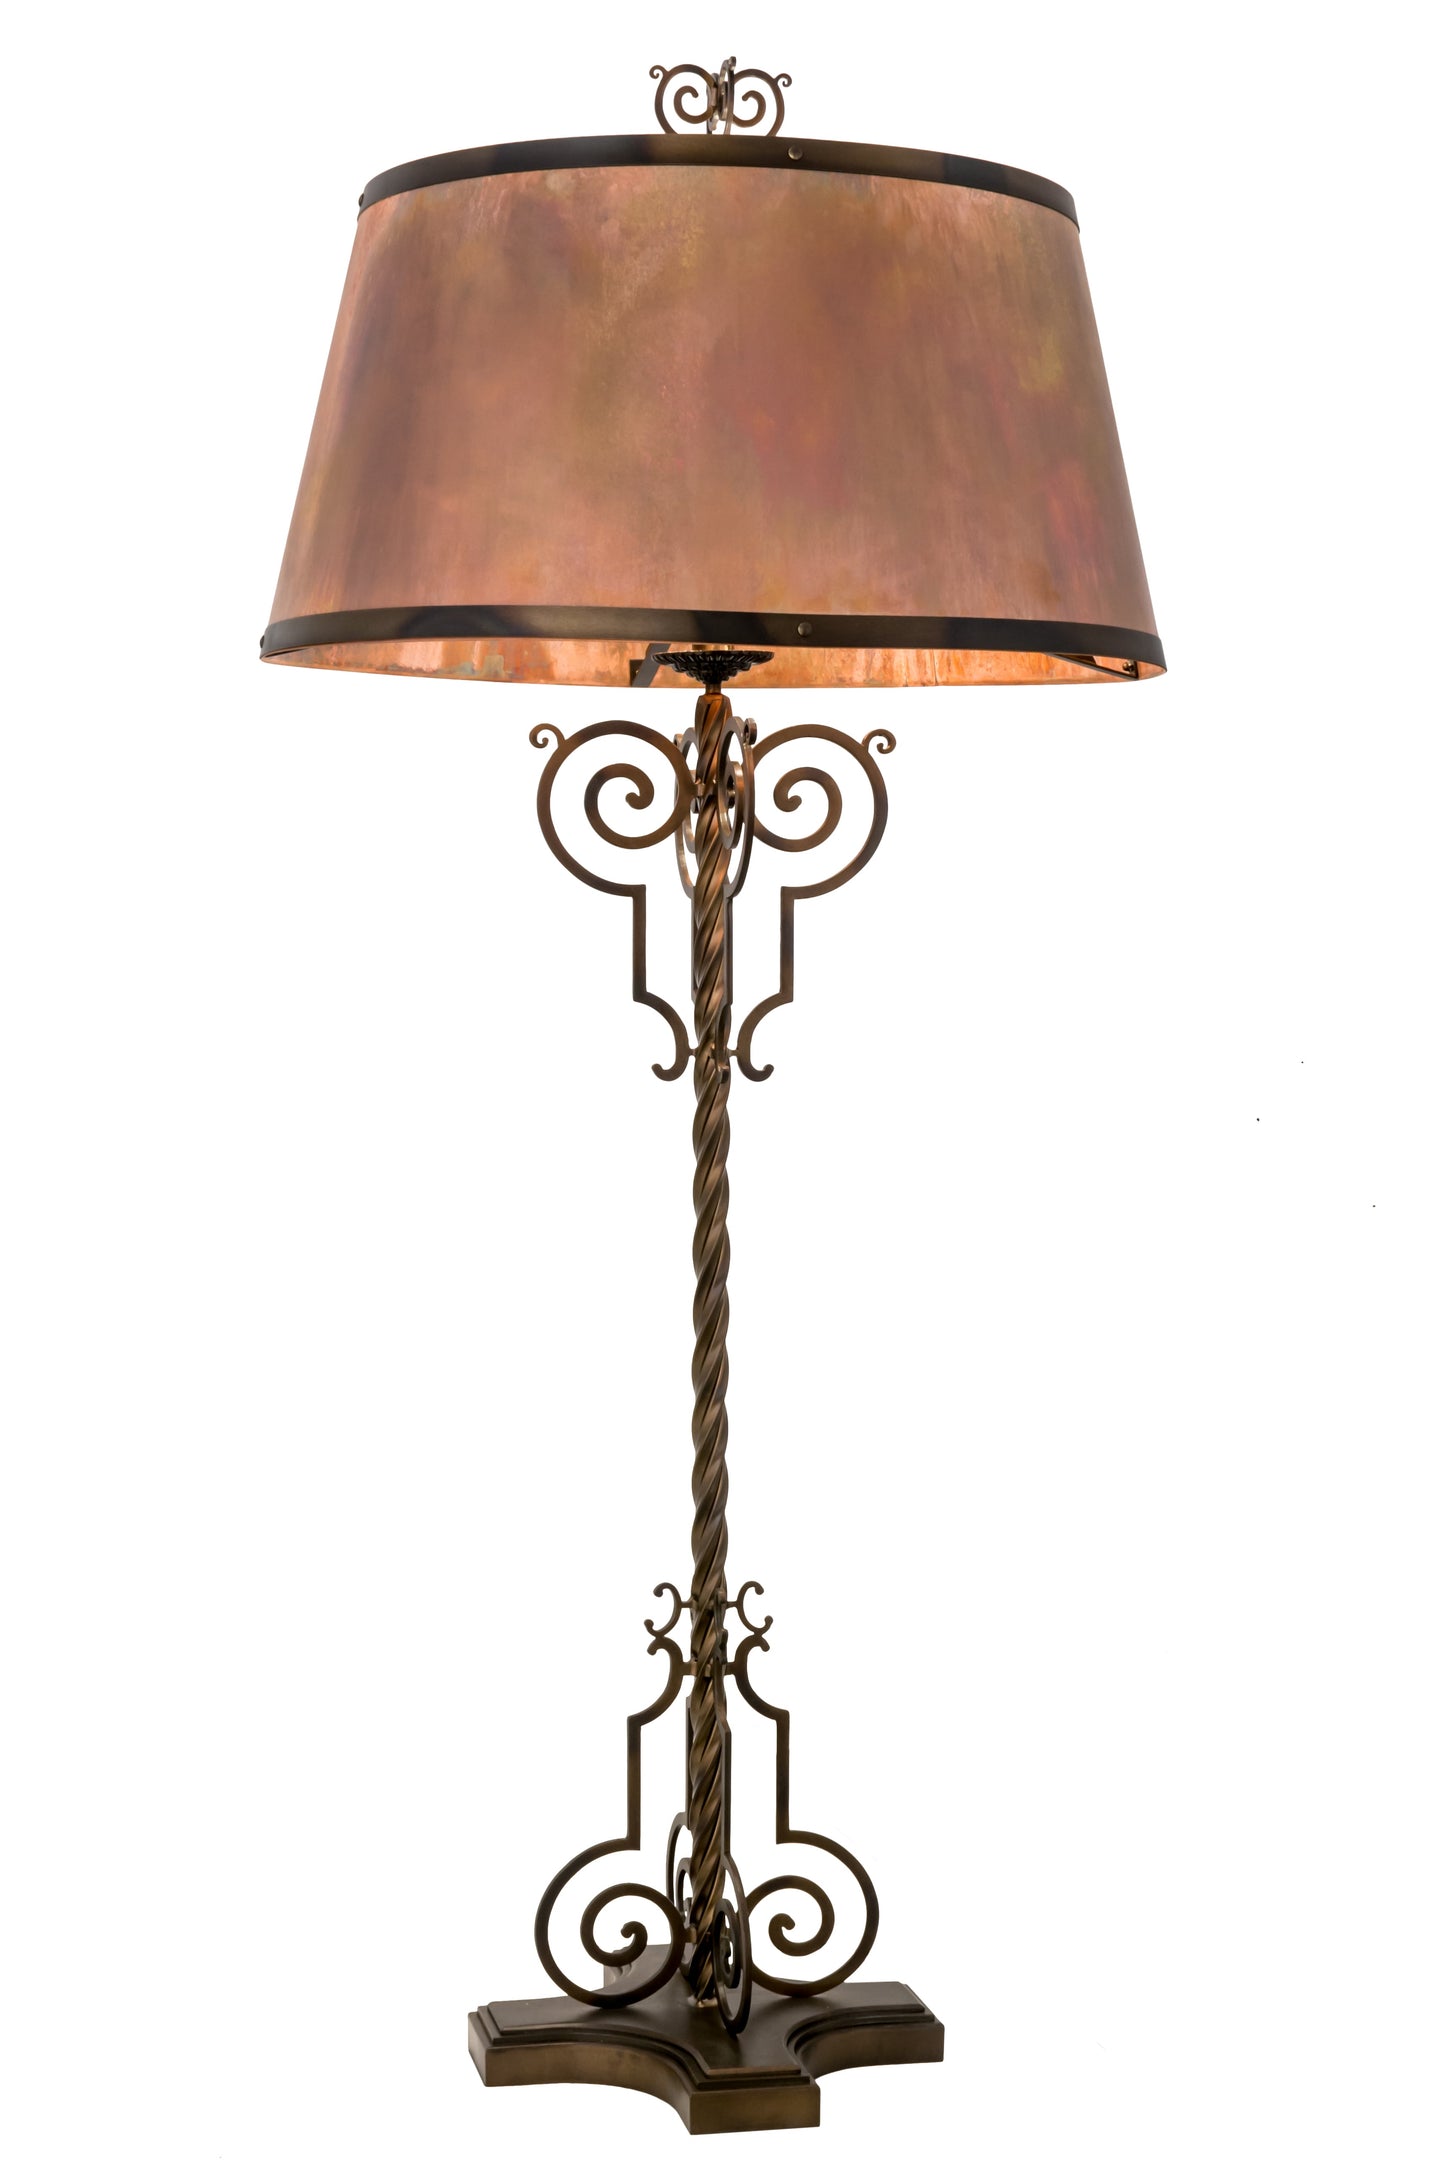 72" Clarice Floor Lamp by 2nd Ave Lighting